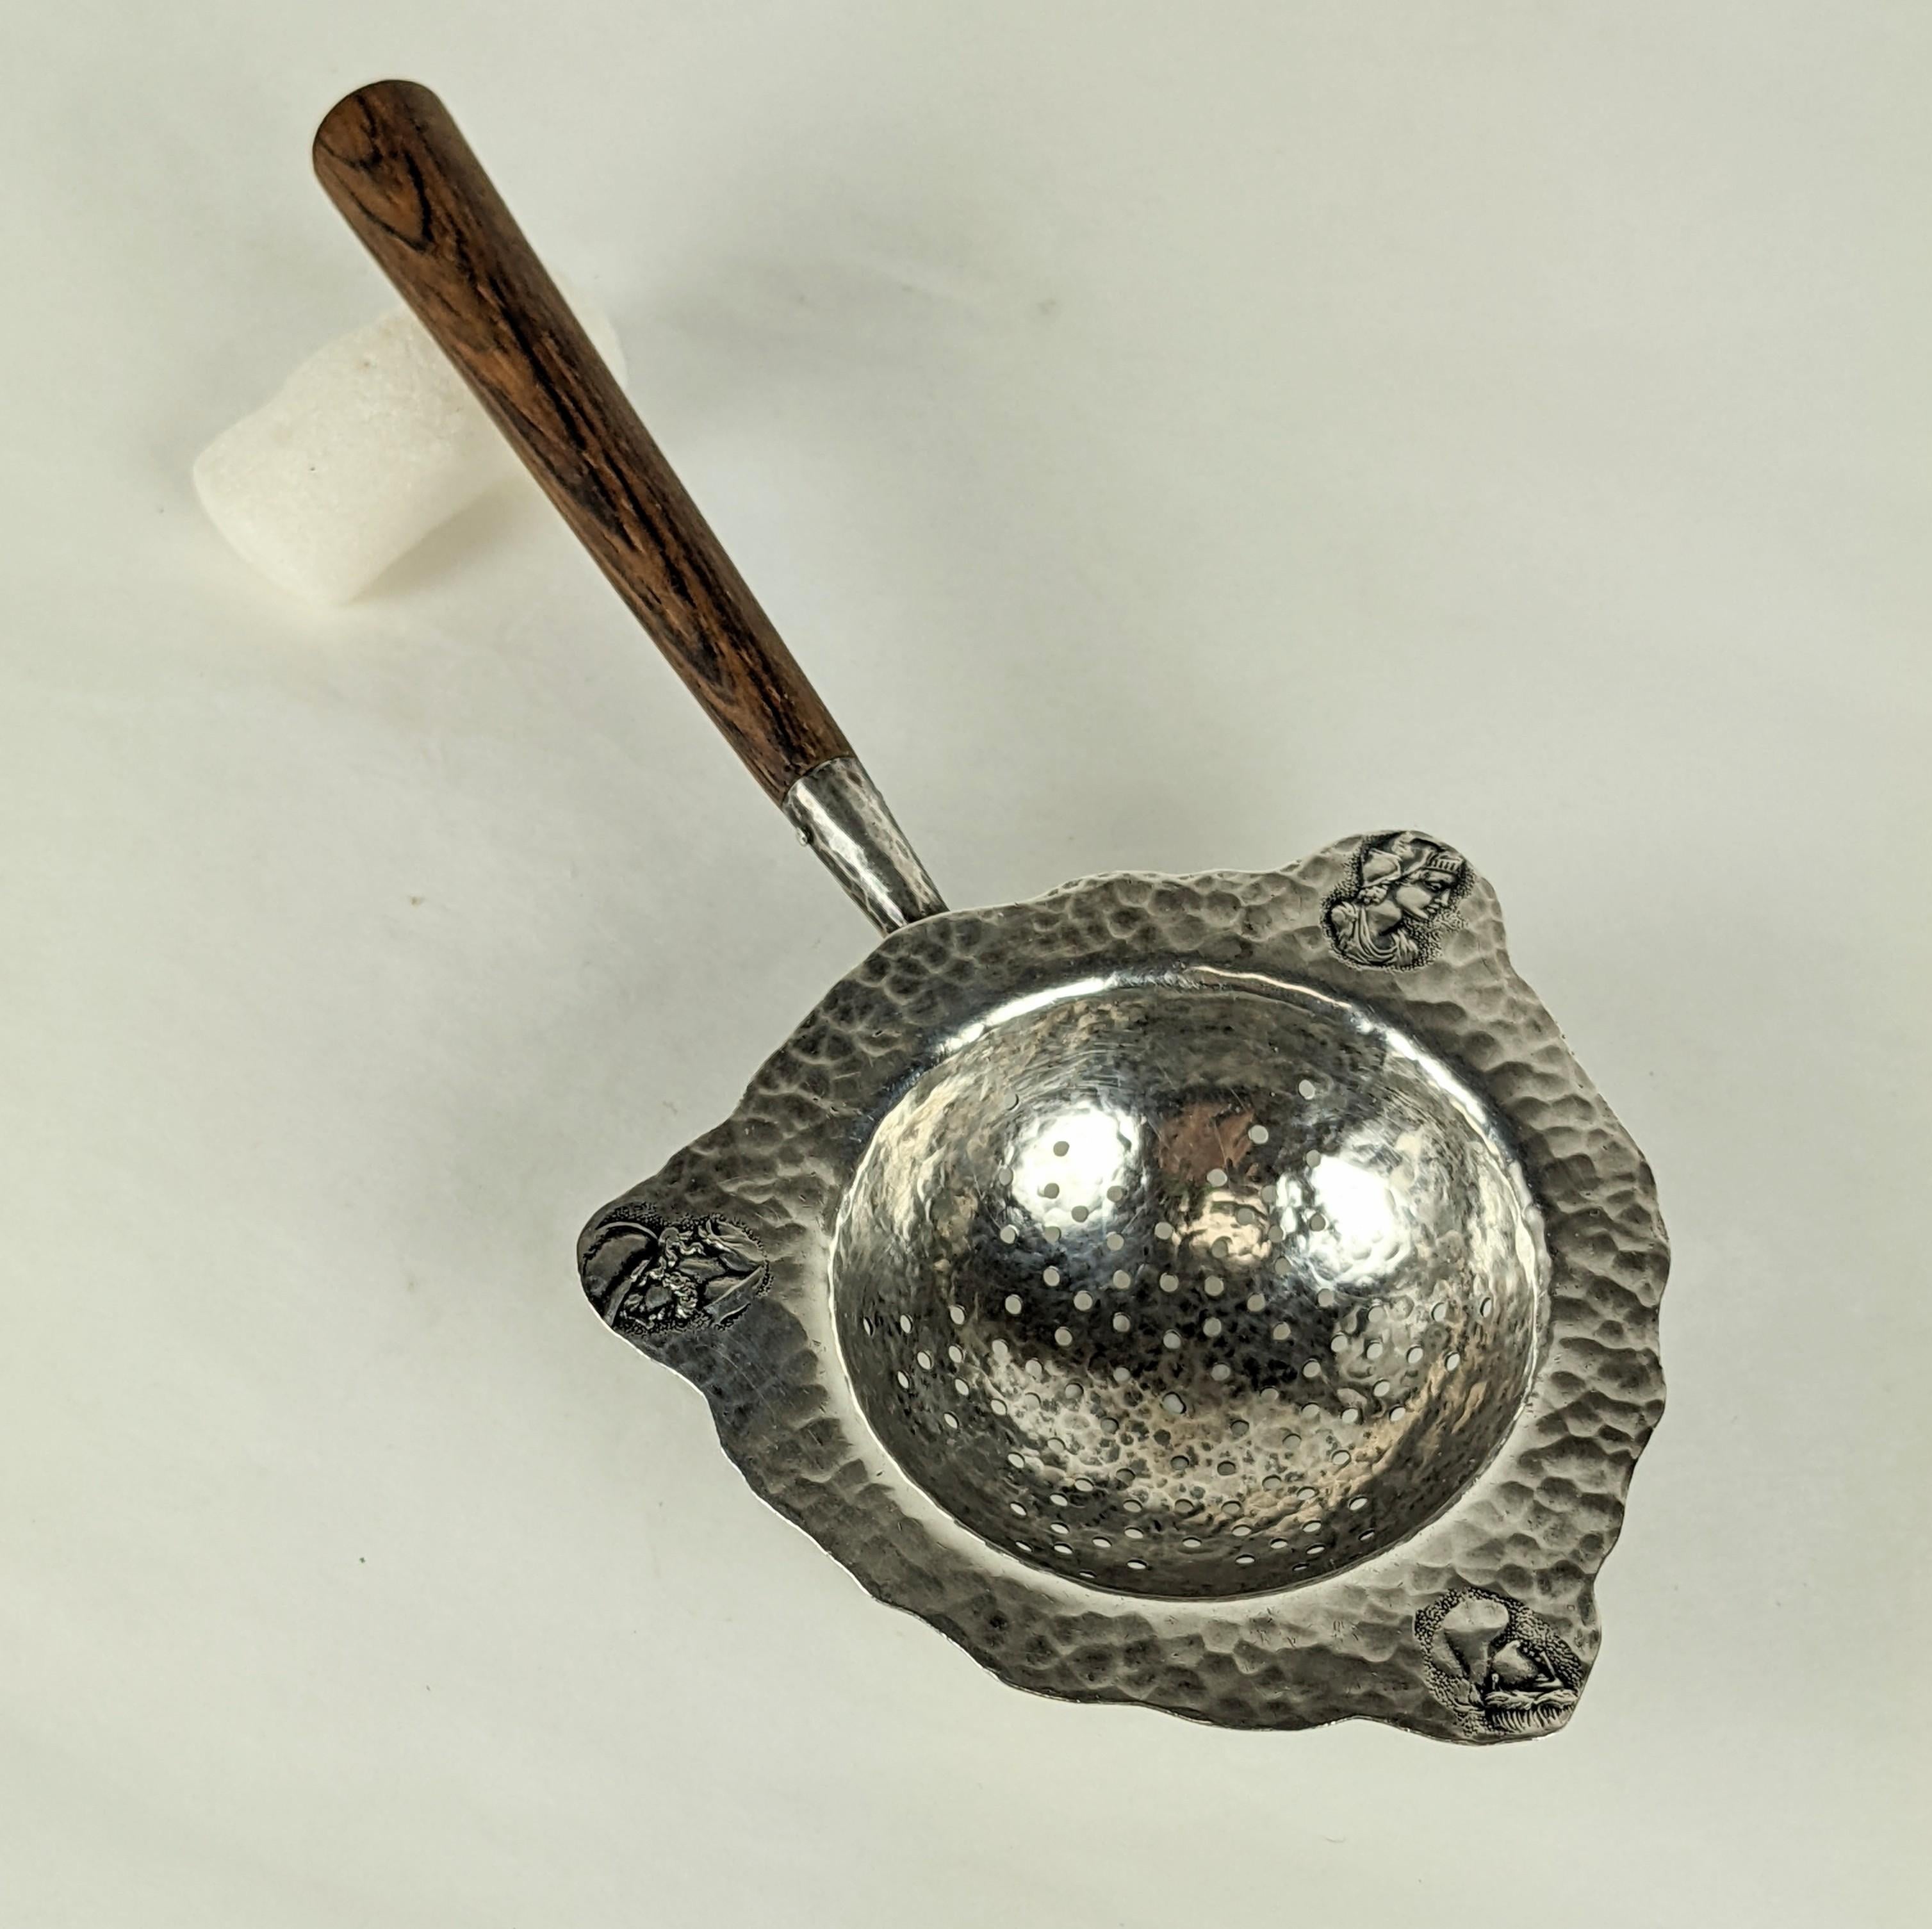 Aesthetic period George Shiebler sterling tea strainer from the late 19th Century. Homeric/ Medallion pattern hand raised with 3 mediallions of profiles from Antiquity. 1880's USA. Signed with company hallmark. Measures: 7.5